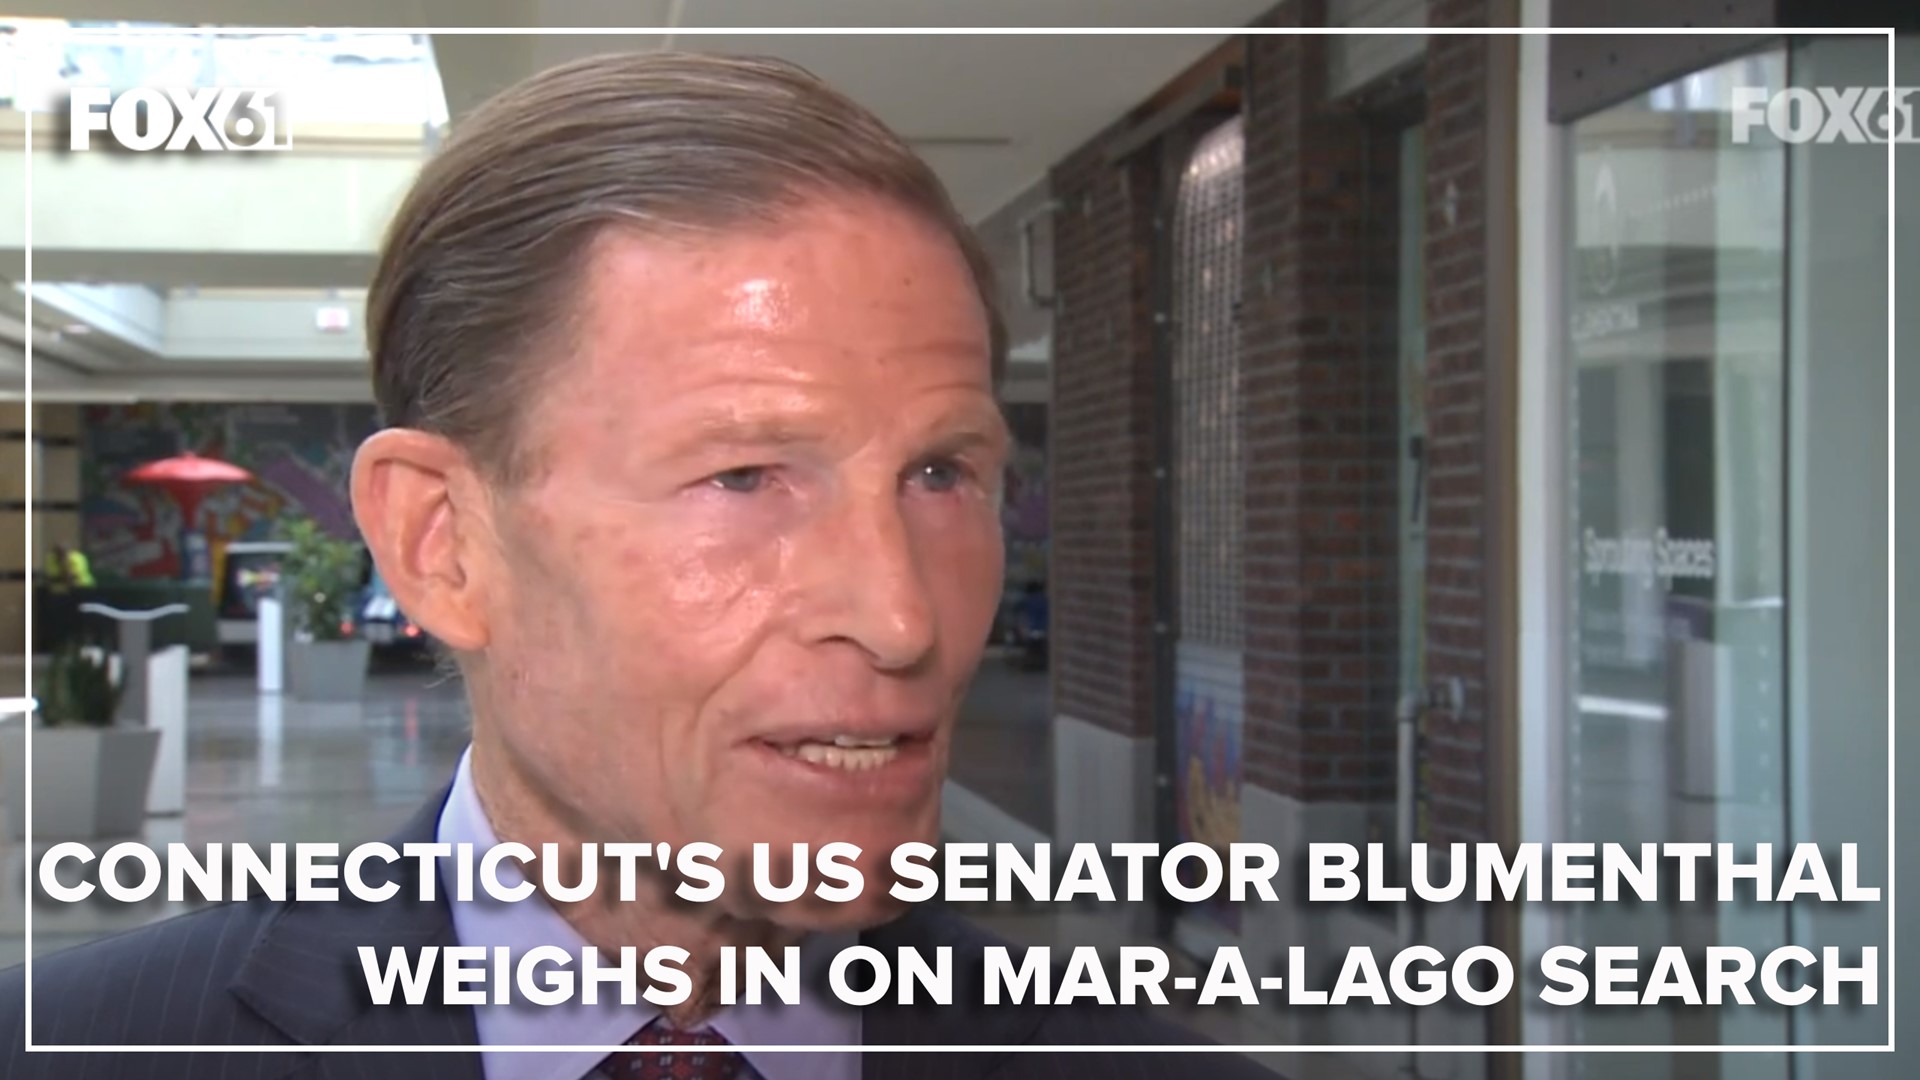 Blumenthal told FOX61 that he has executed searches as a federal prosecutor, and they all have to be "carefully vetted, screened, verified based on facts."